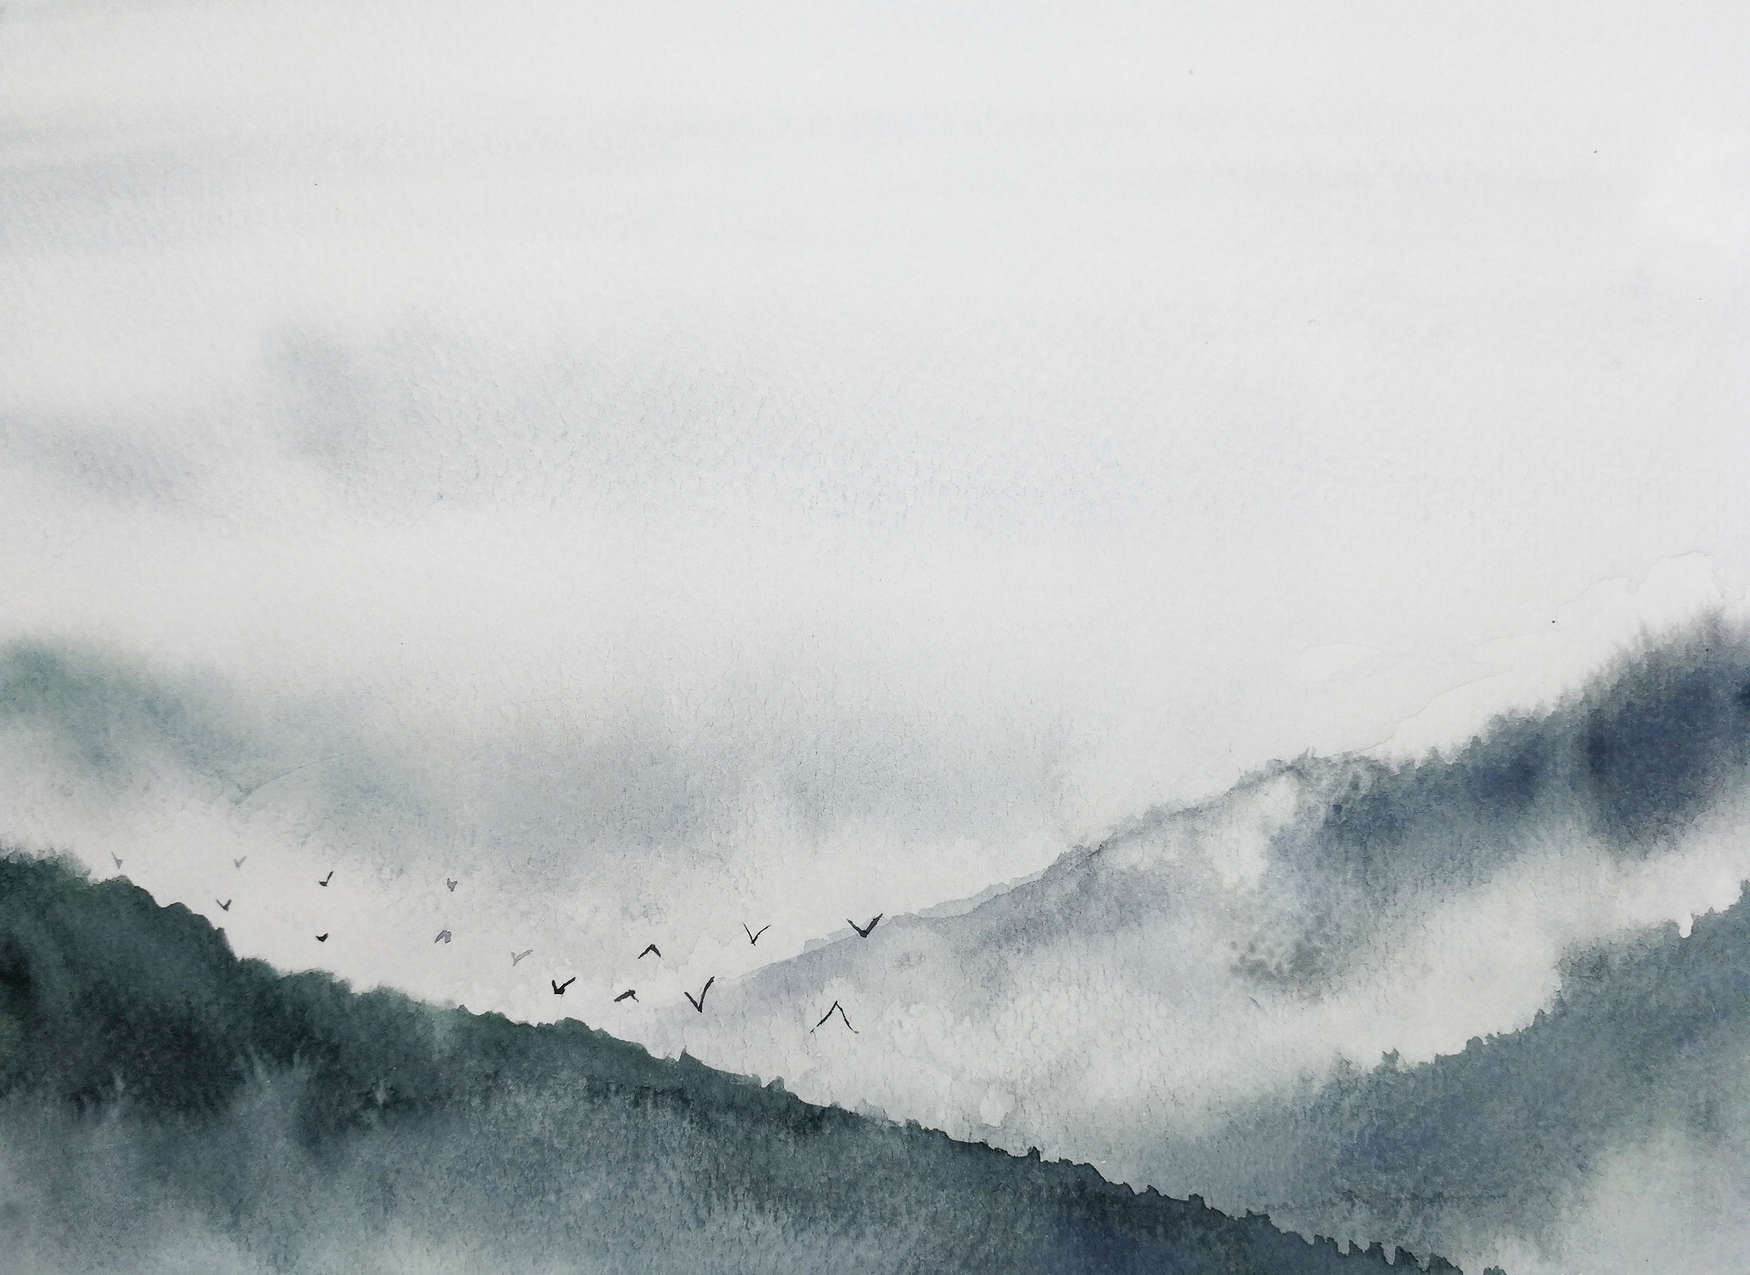             Misty landscape in painting style - Grey, Black
        